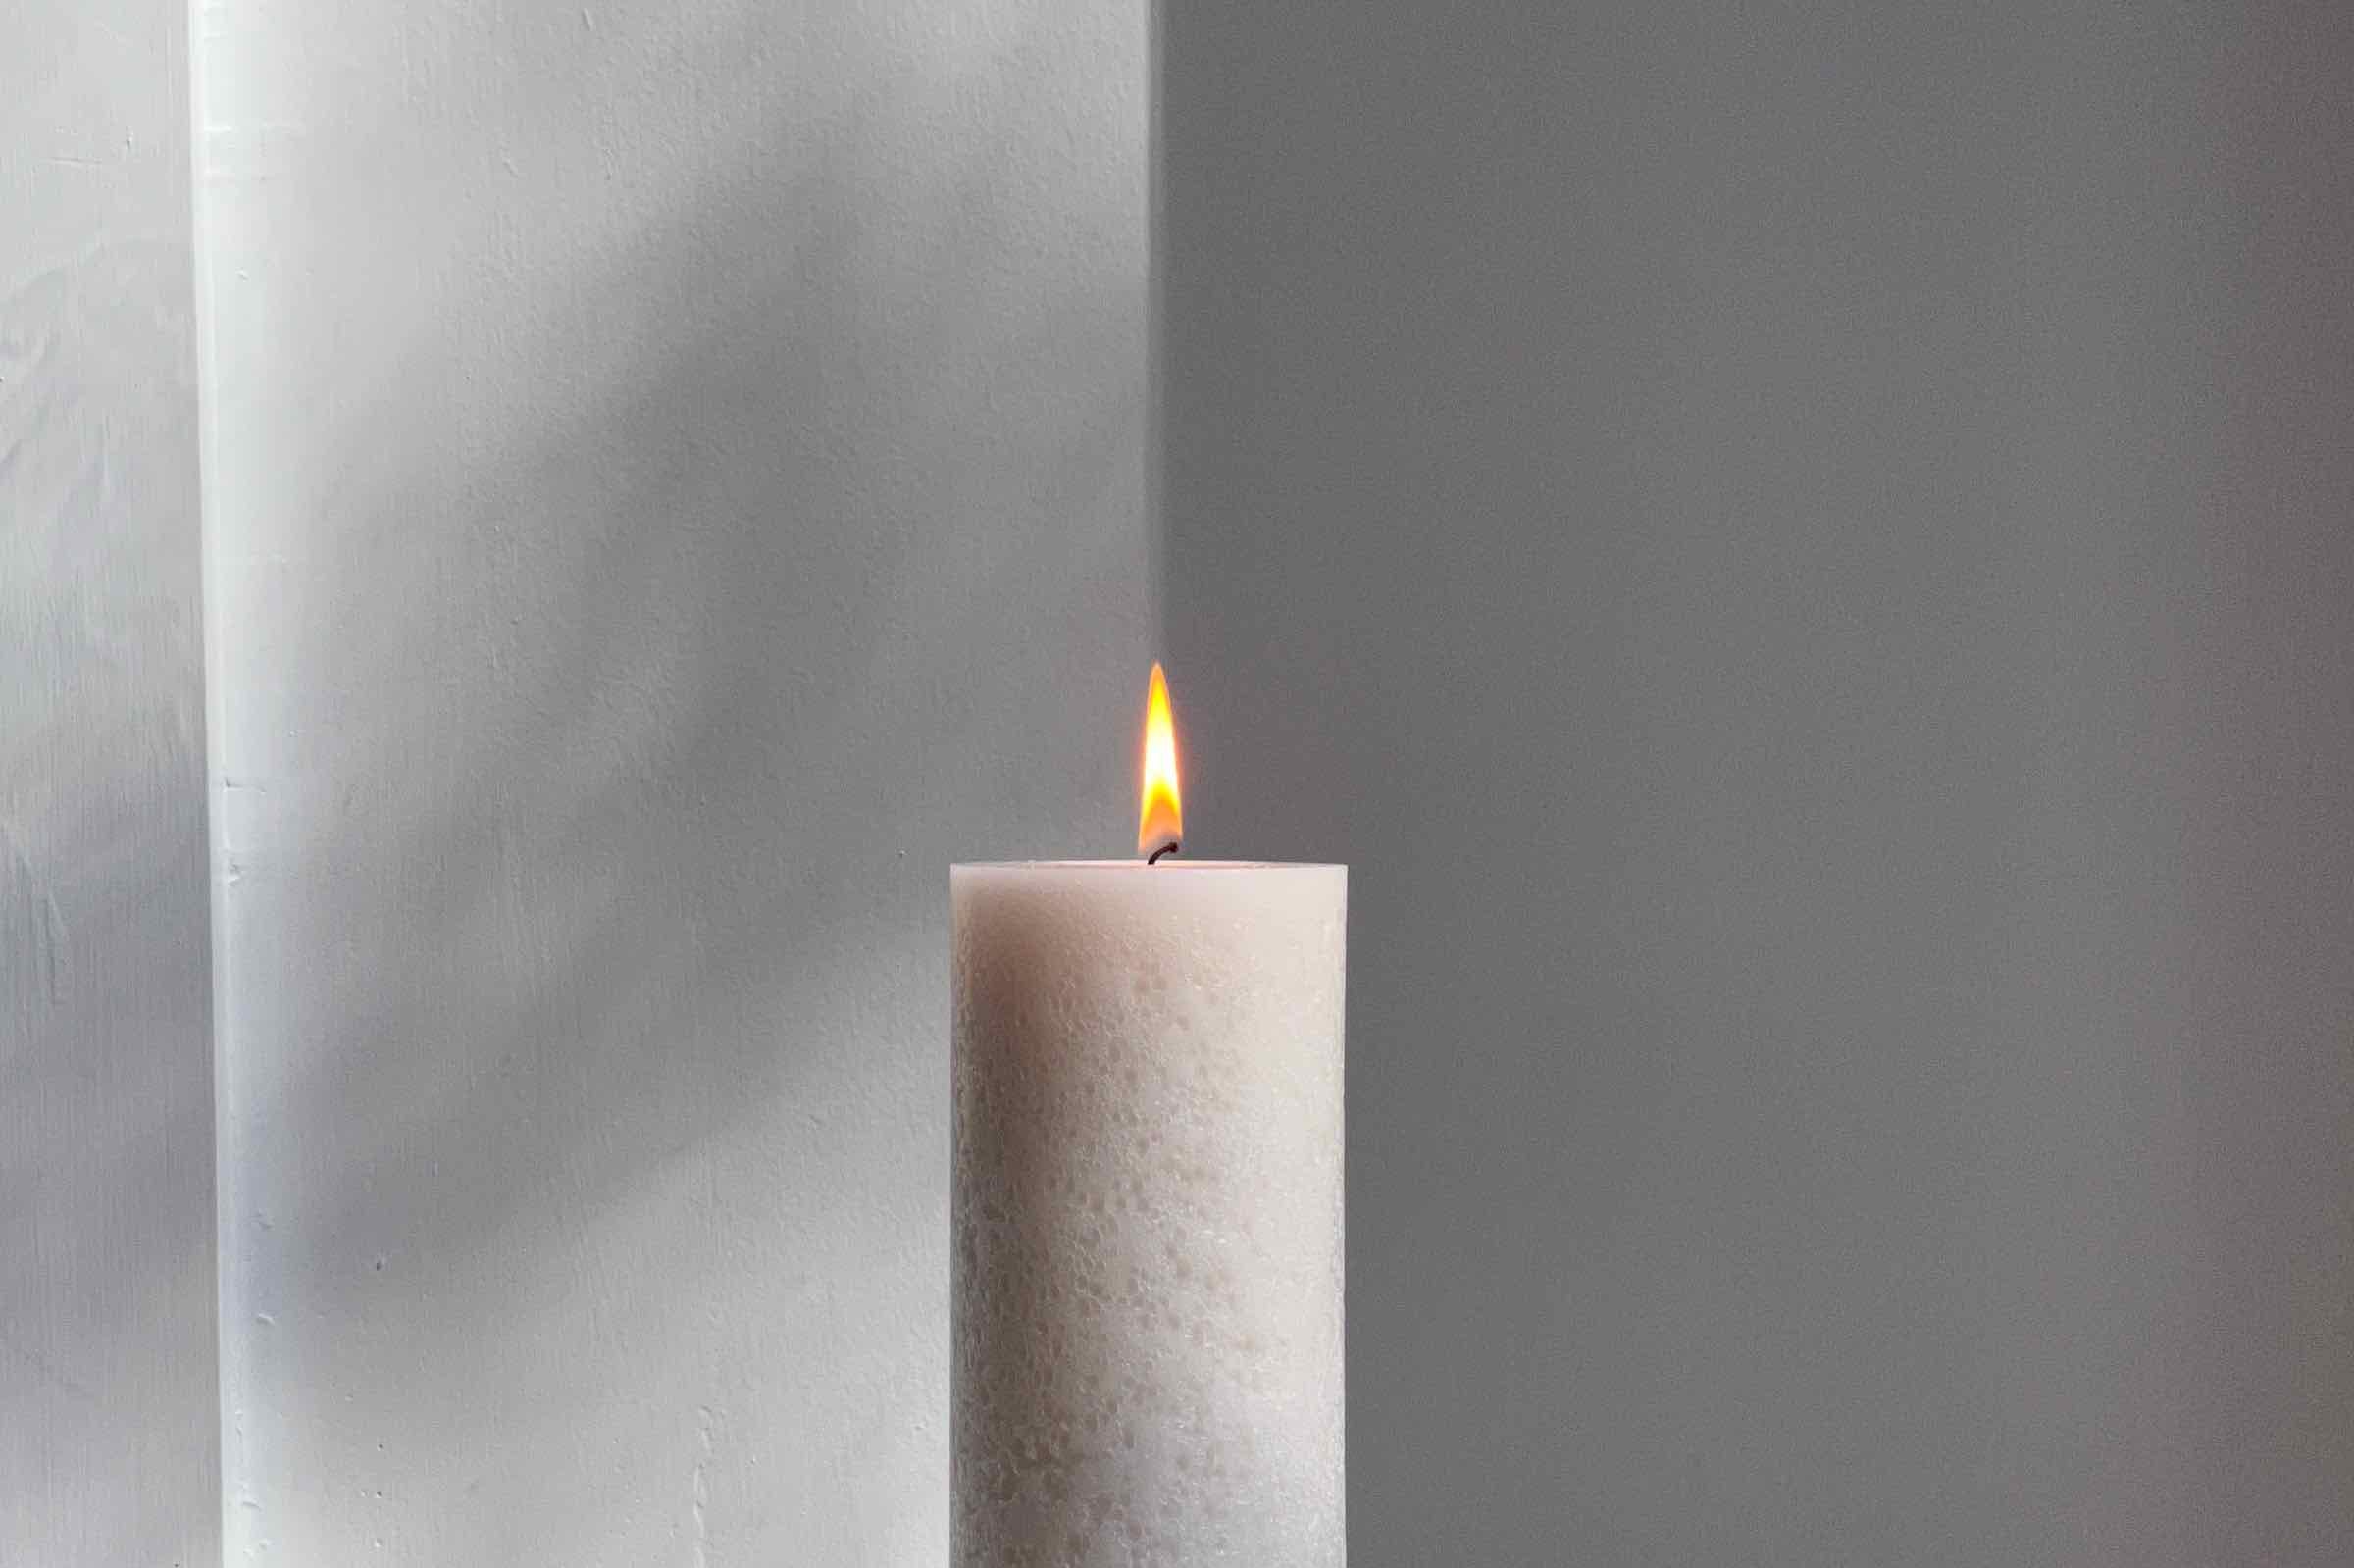 Say Yes To Clean Candles - Palm Done Right